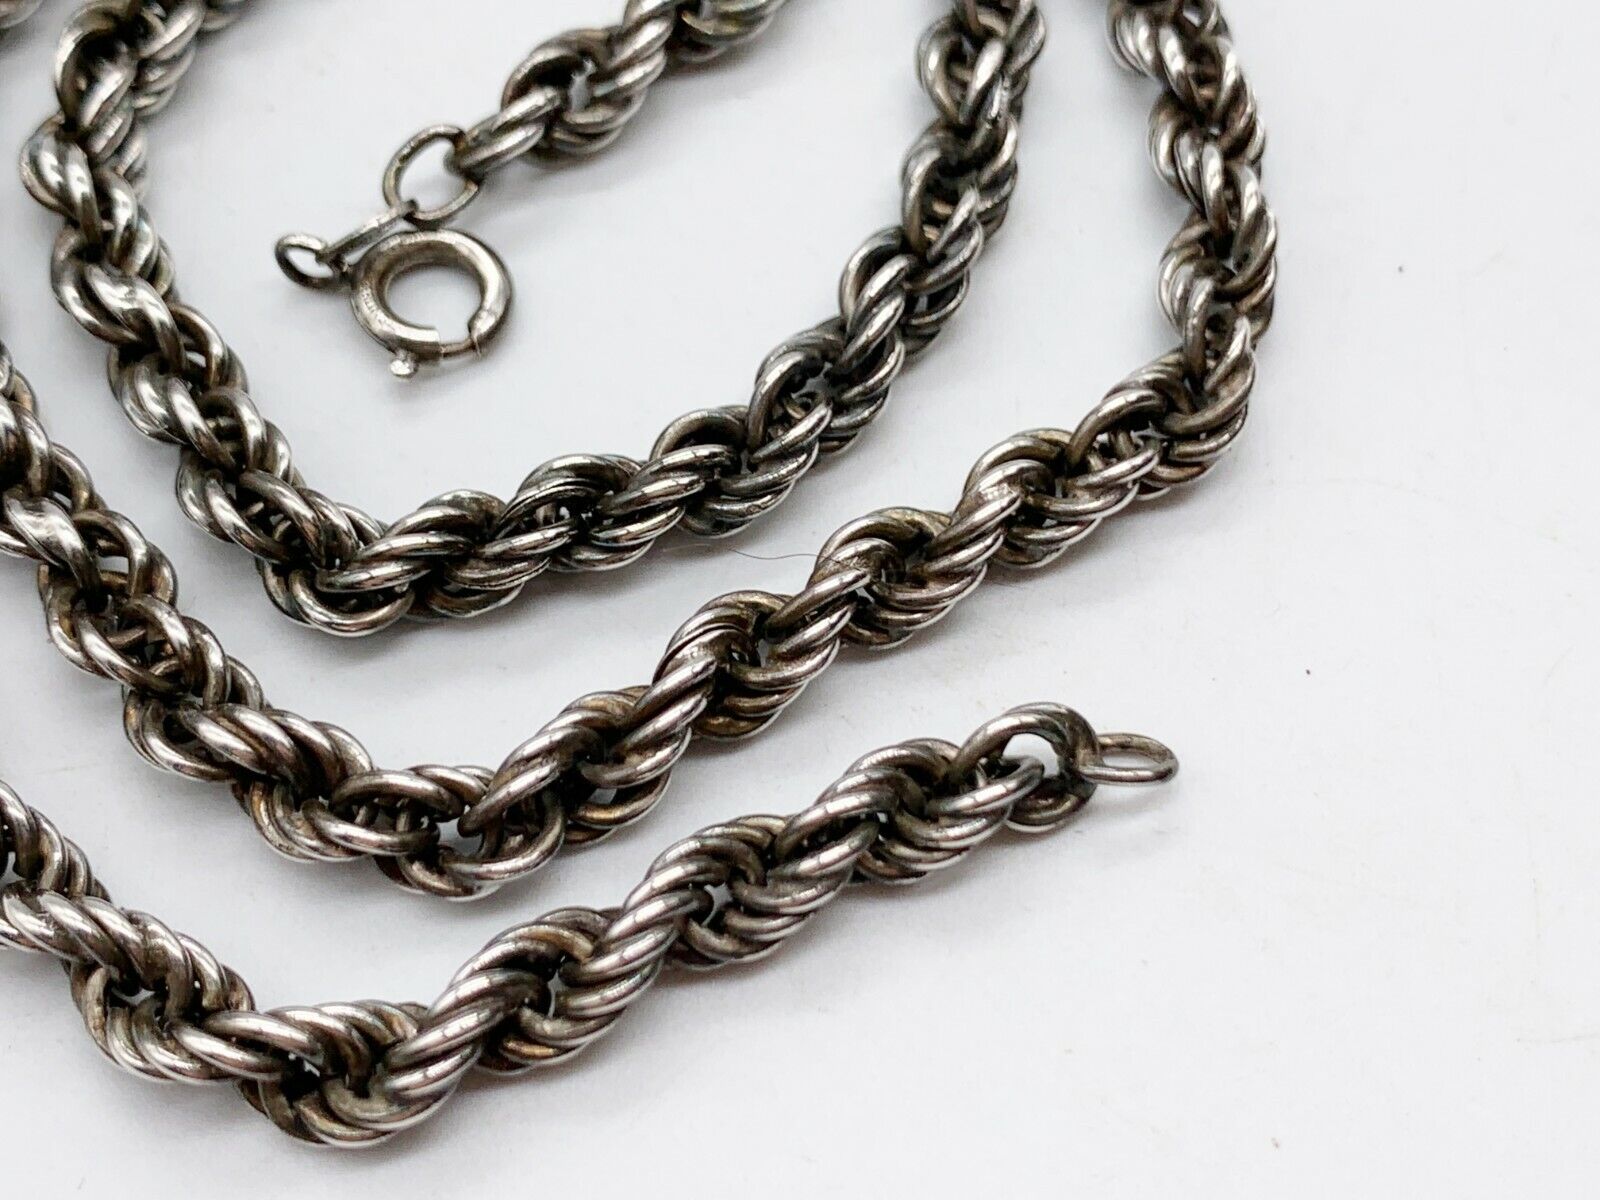 VINTAGE SOLID SILVER CHUNKY WELL MADE CELTIC ROPE TWISTED LADIES GENTS NECKLACE Nowy wygląd, klasyczny